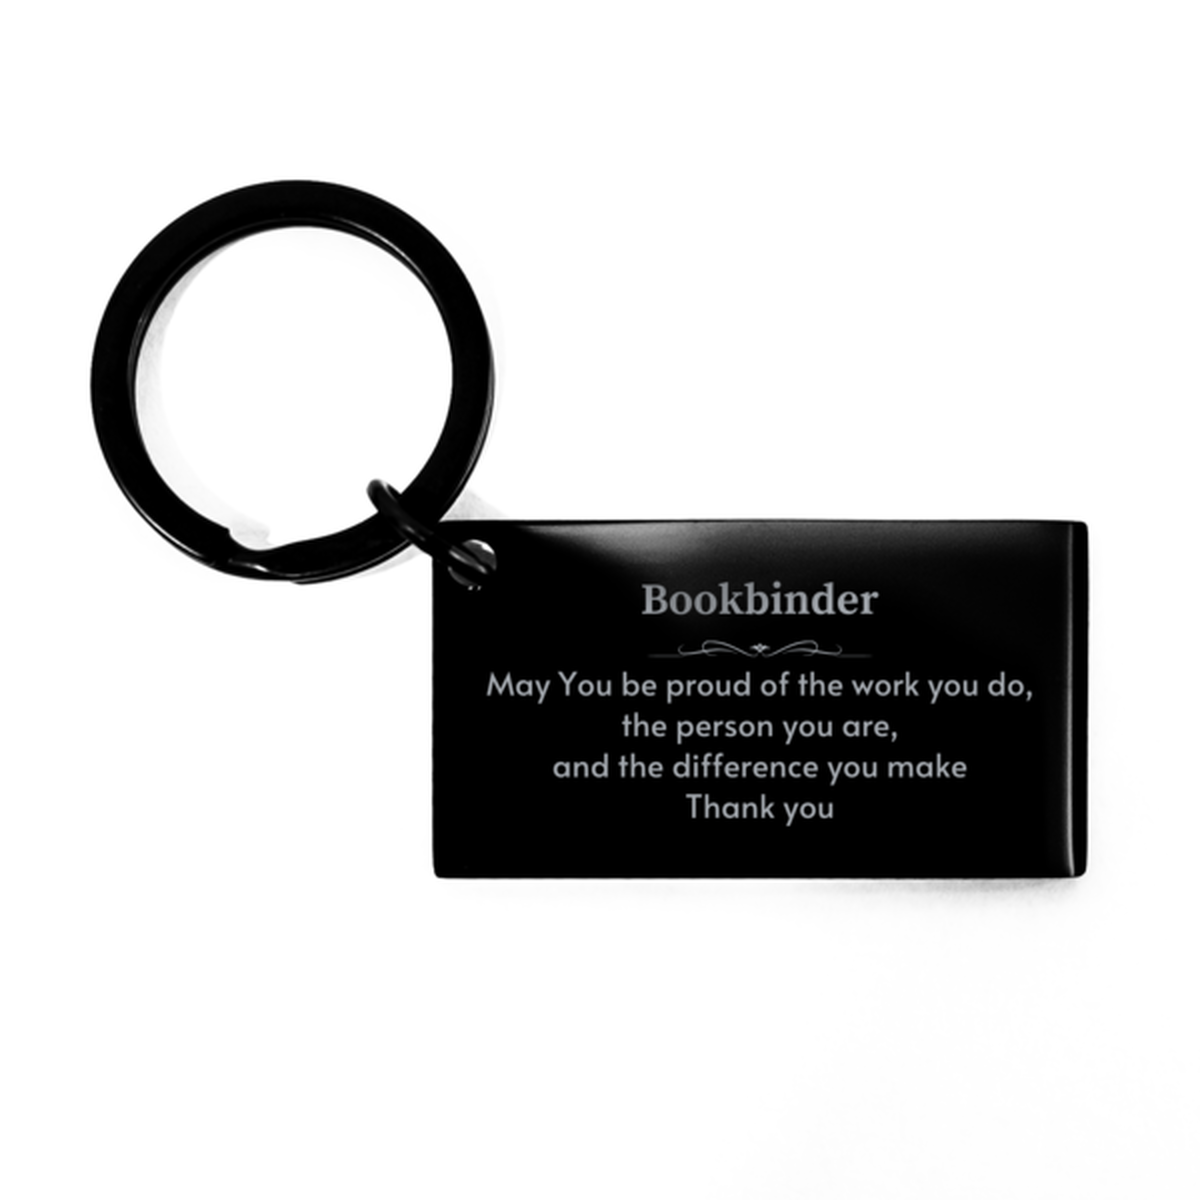 Heartwarming Keychain Retirement Coworkers Gifts for Bookbinder, Database Administrator May You be proud of the work you do, the person you are Gifts for Boss Men Women Friends